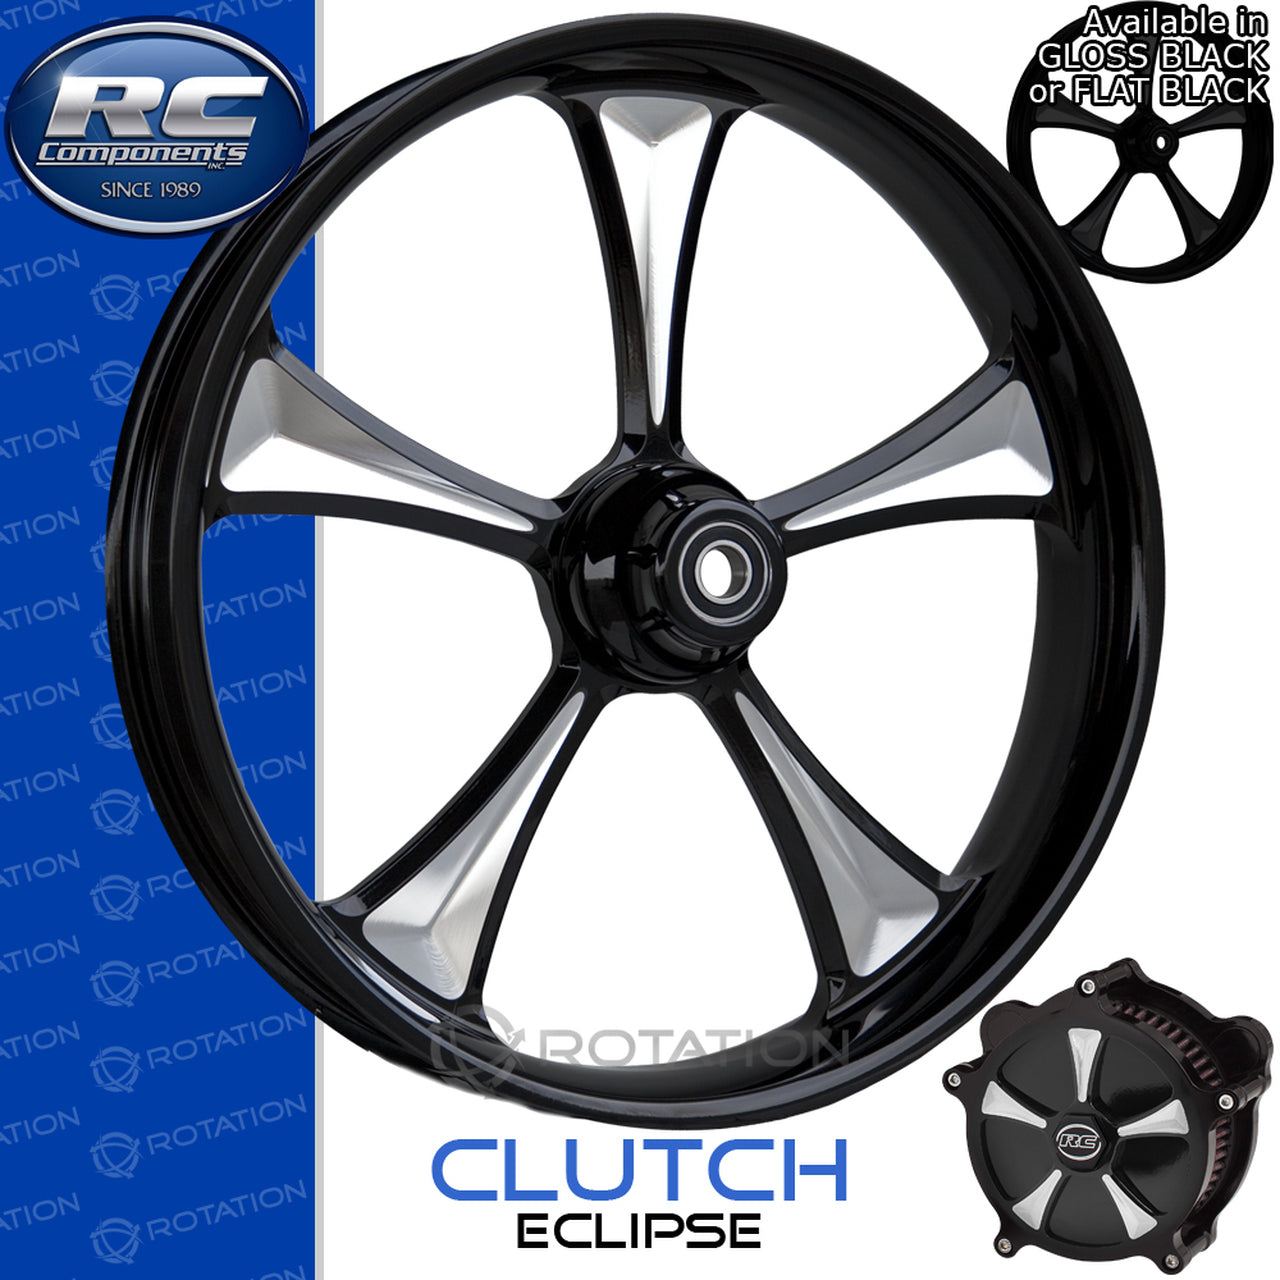 RC Components Clutch Eclipse Touring Wheel